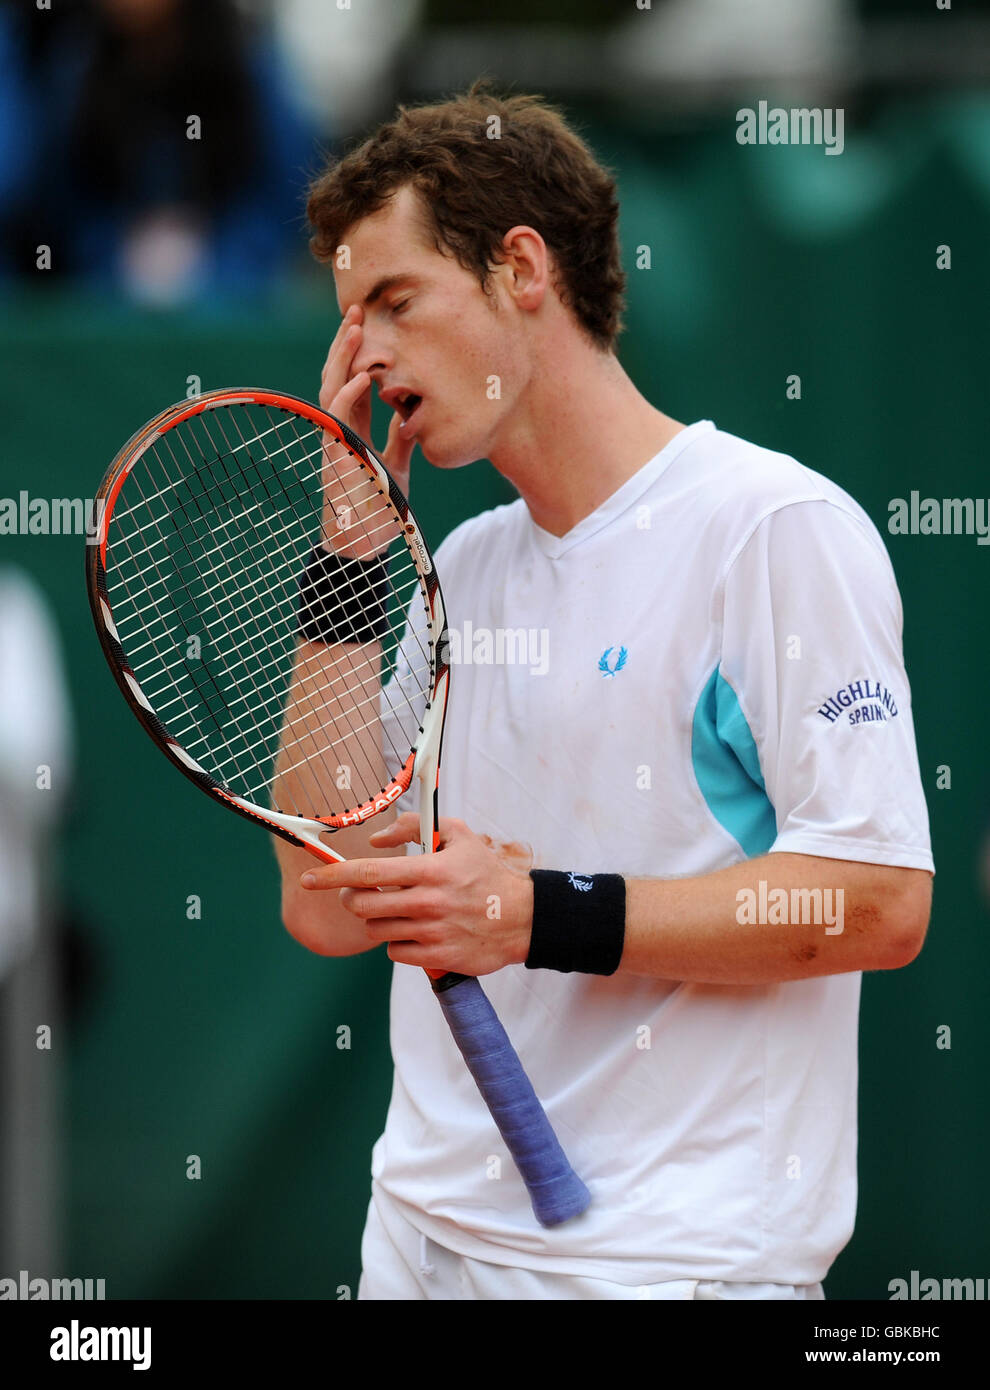 Tennis - ATP World Tour Masters - Monte-Carlo - Semi Final - Rafael Nadal v Andy Murray. Great Britain's Andy Murray sees his hopes of winning fading Stock Photo